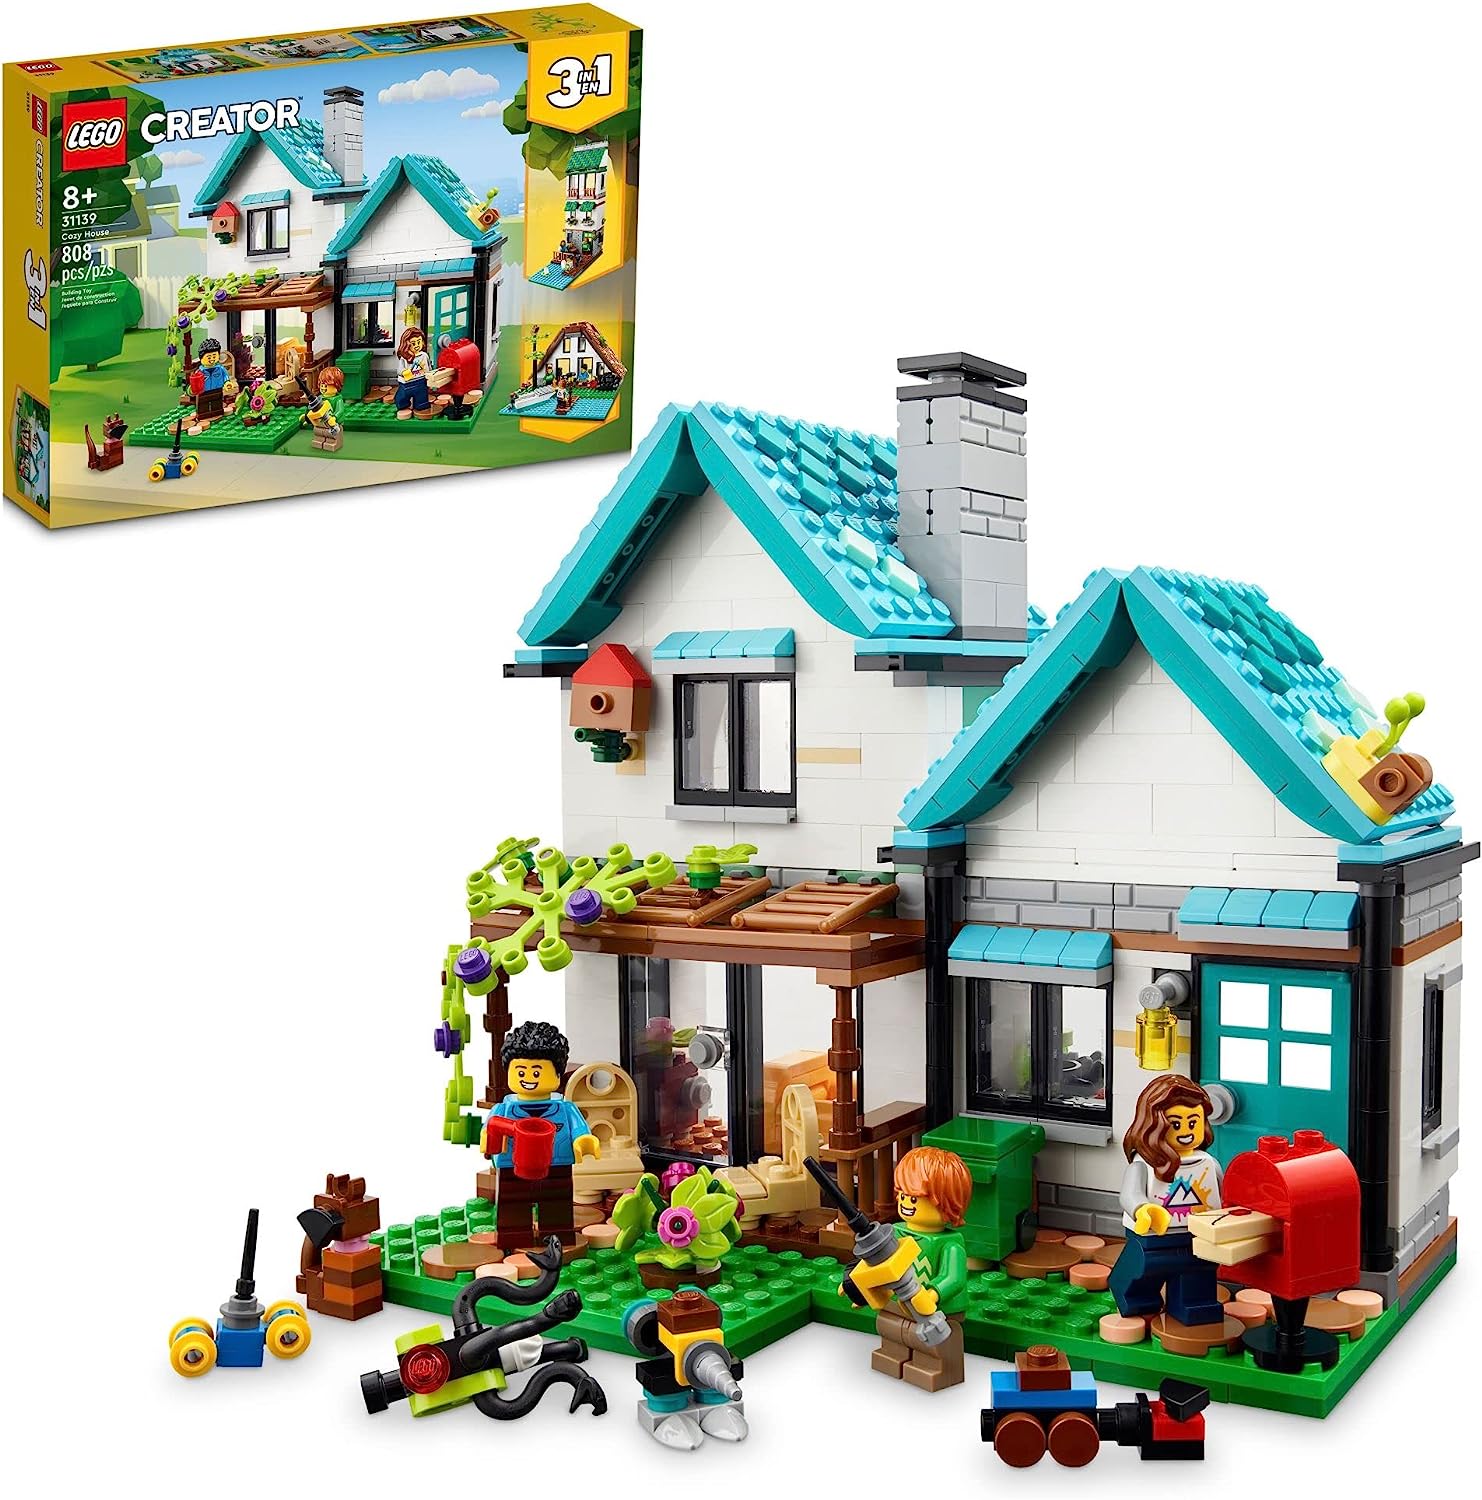 LEGO Creator 3 in 1 Cozy House Building Kit